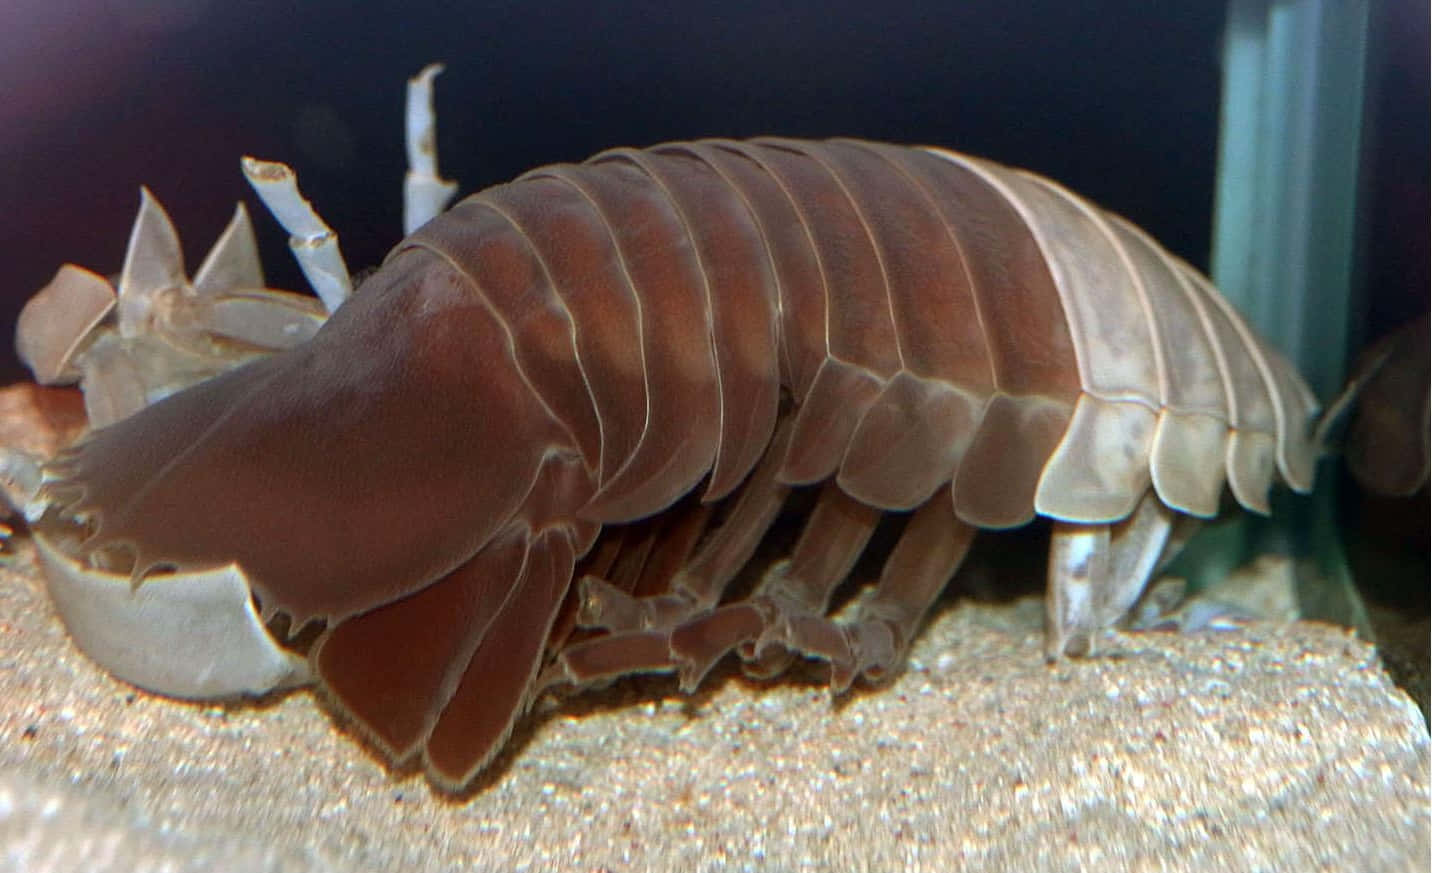 Caption: An Intriguing Underwater Exploration: The Mysterious Giant Isopod Wallpaper